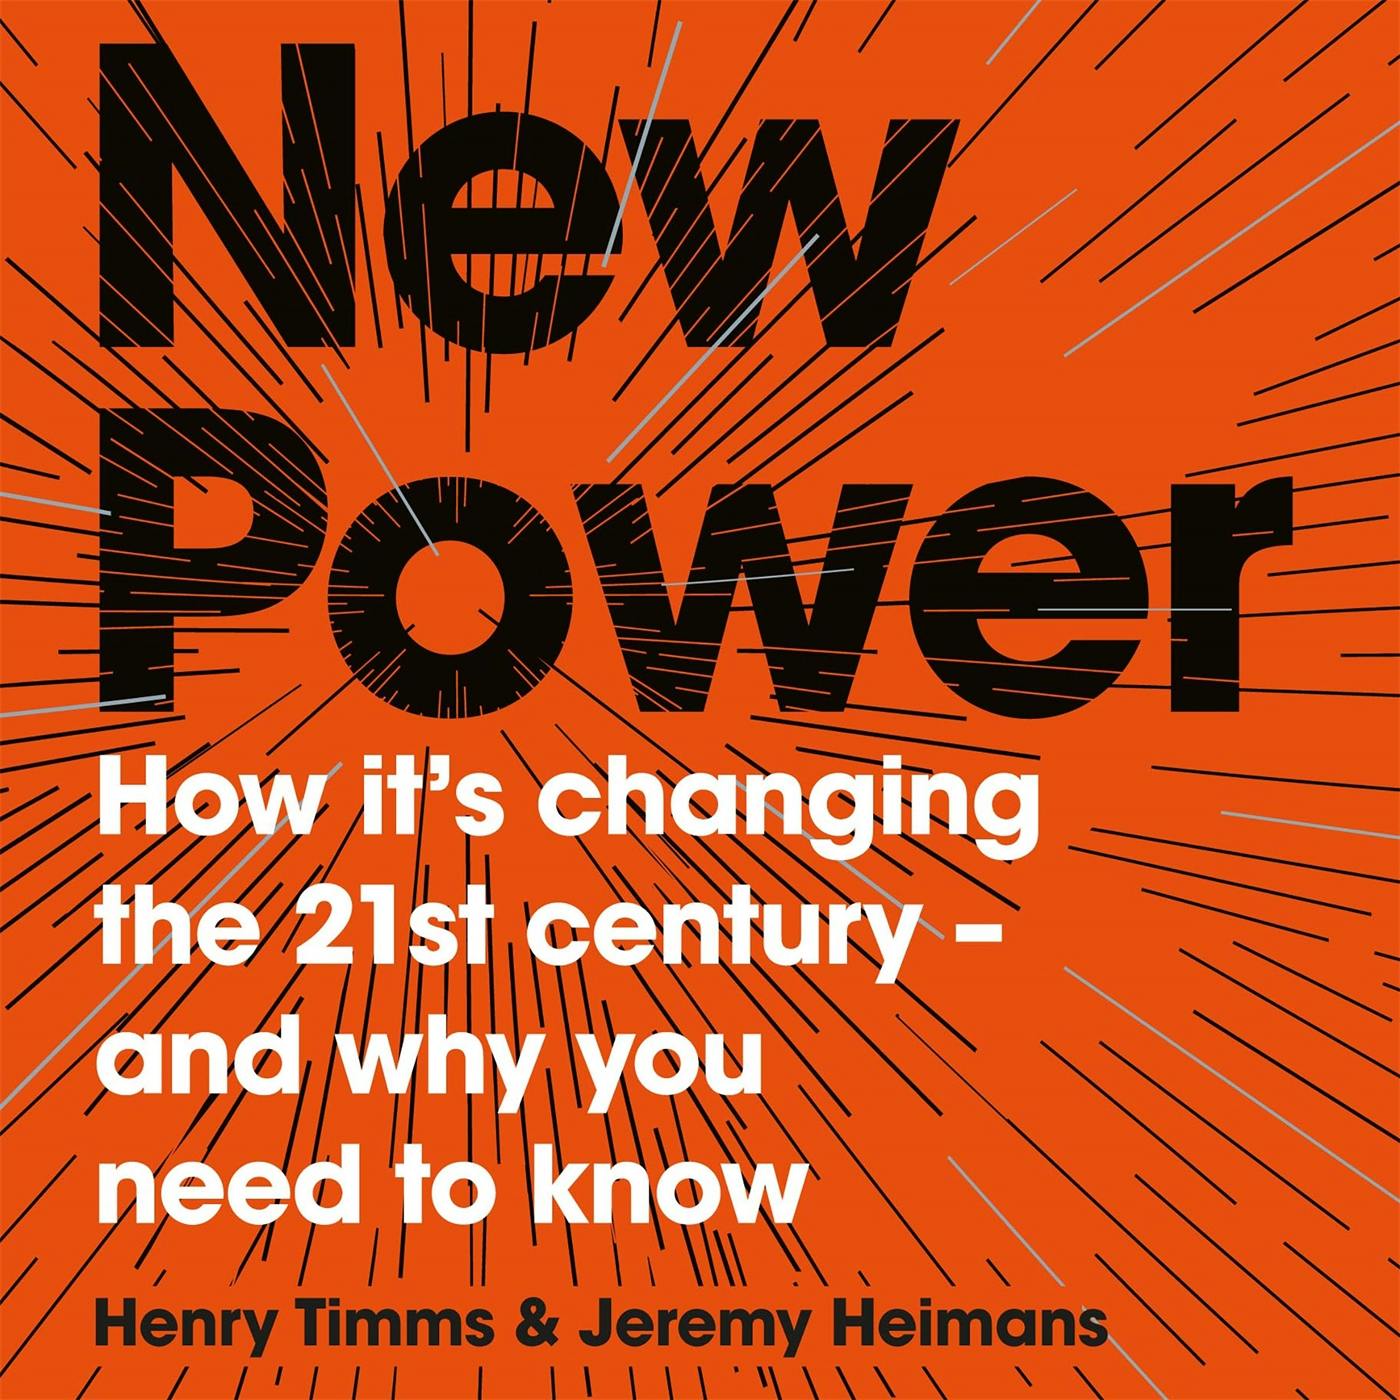 New Power: Why outsiders are winning, institutions are failing, and how the rest of us can keep up in the age of mass participation - Henry Timms, Jeremy Heimans